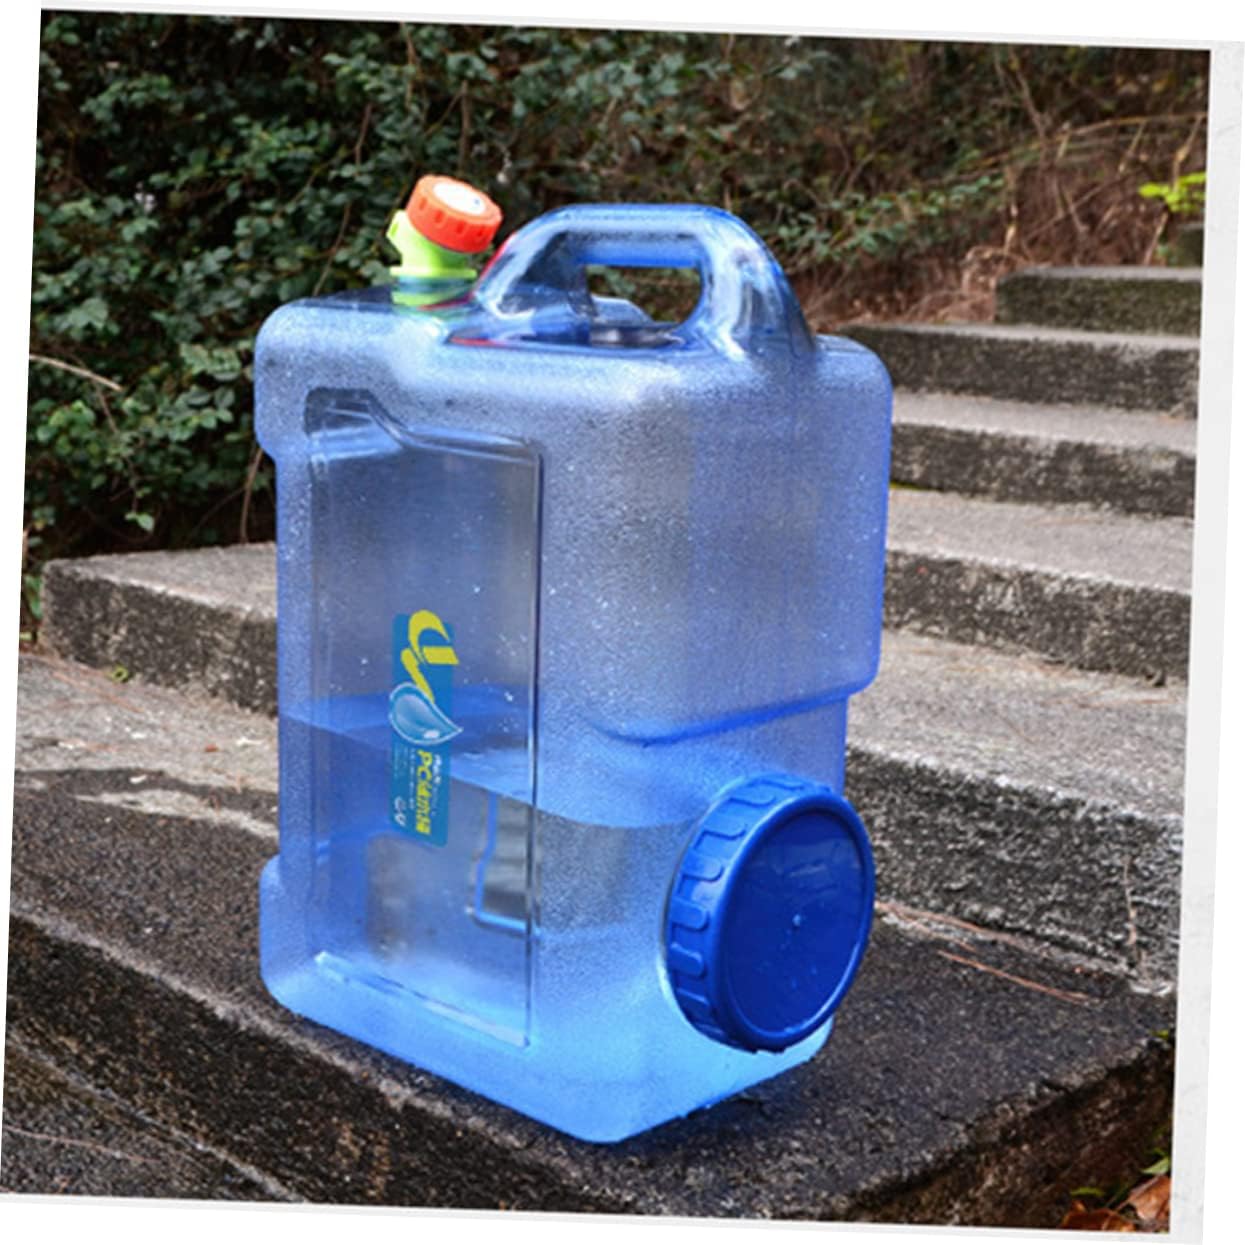 25L Portable Water Dispenser Container for the refrigerator placed on the stairs